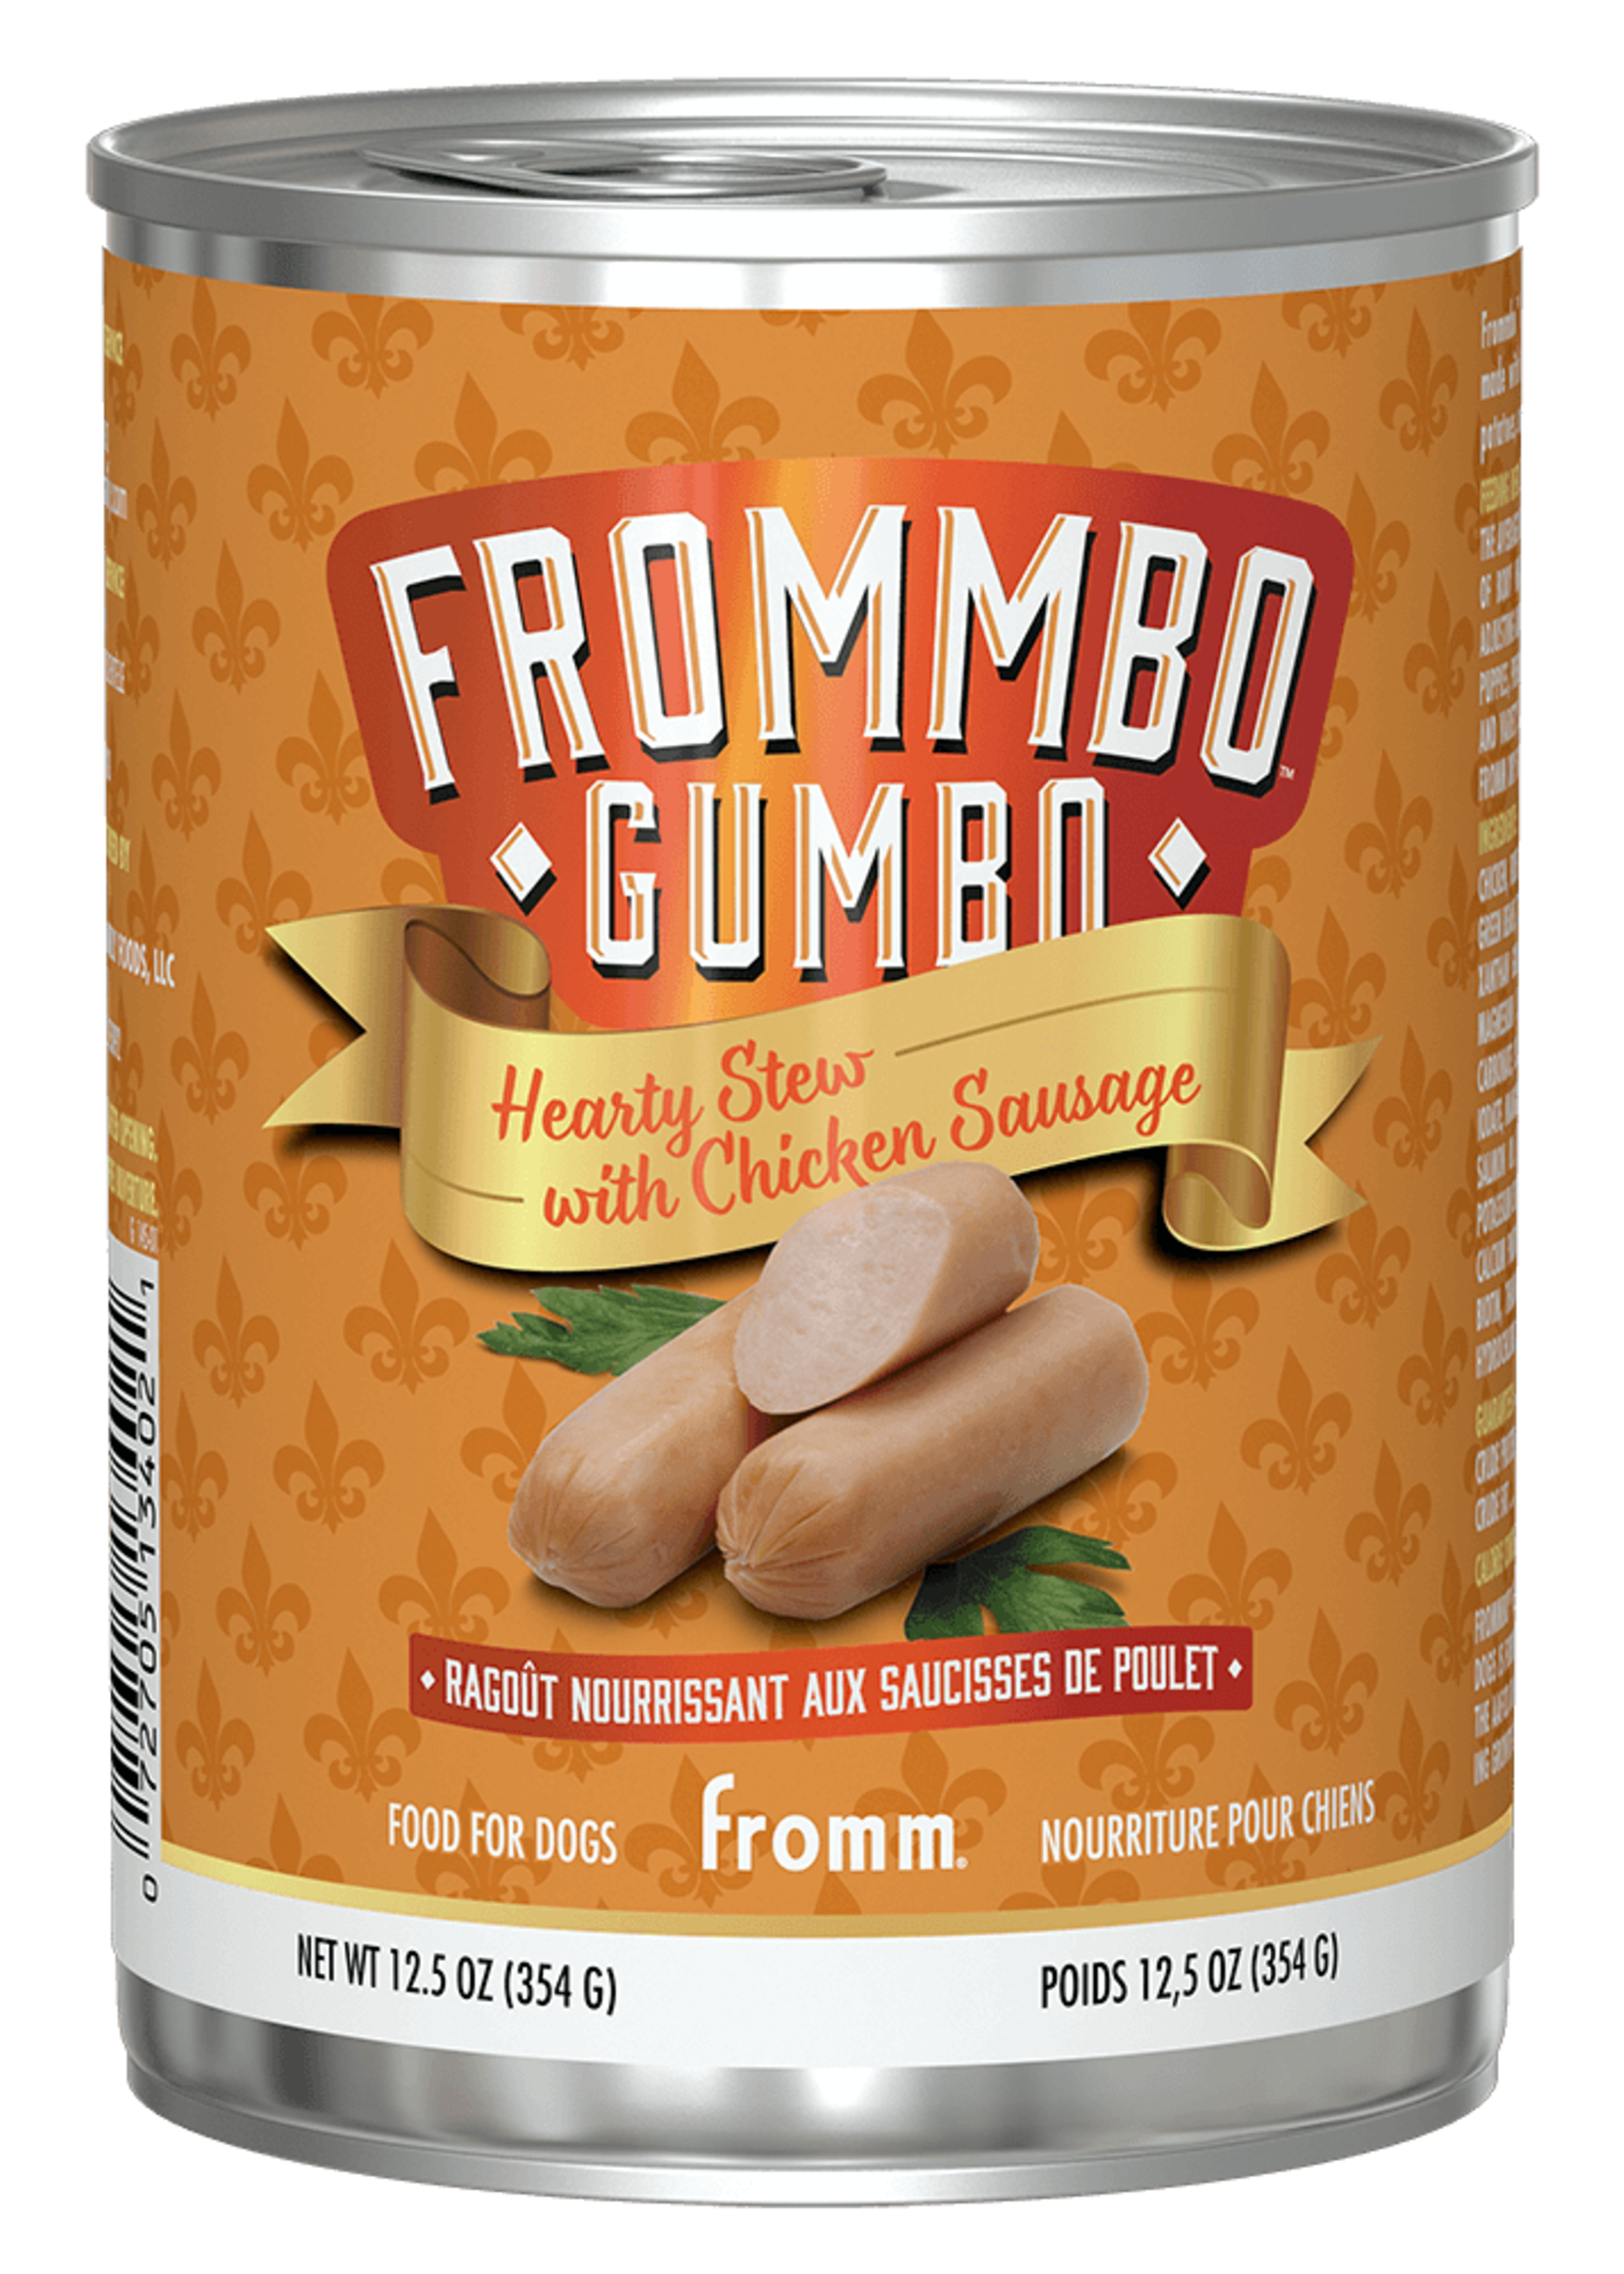 Fromm Family Pet Food Fromm Dog Frommbo Gumbo Hearty Stew w/ Chicken Sausage 12.5 oz single